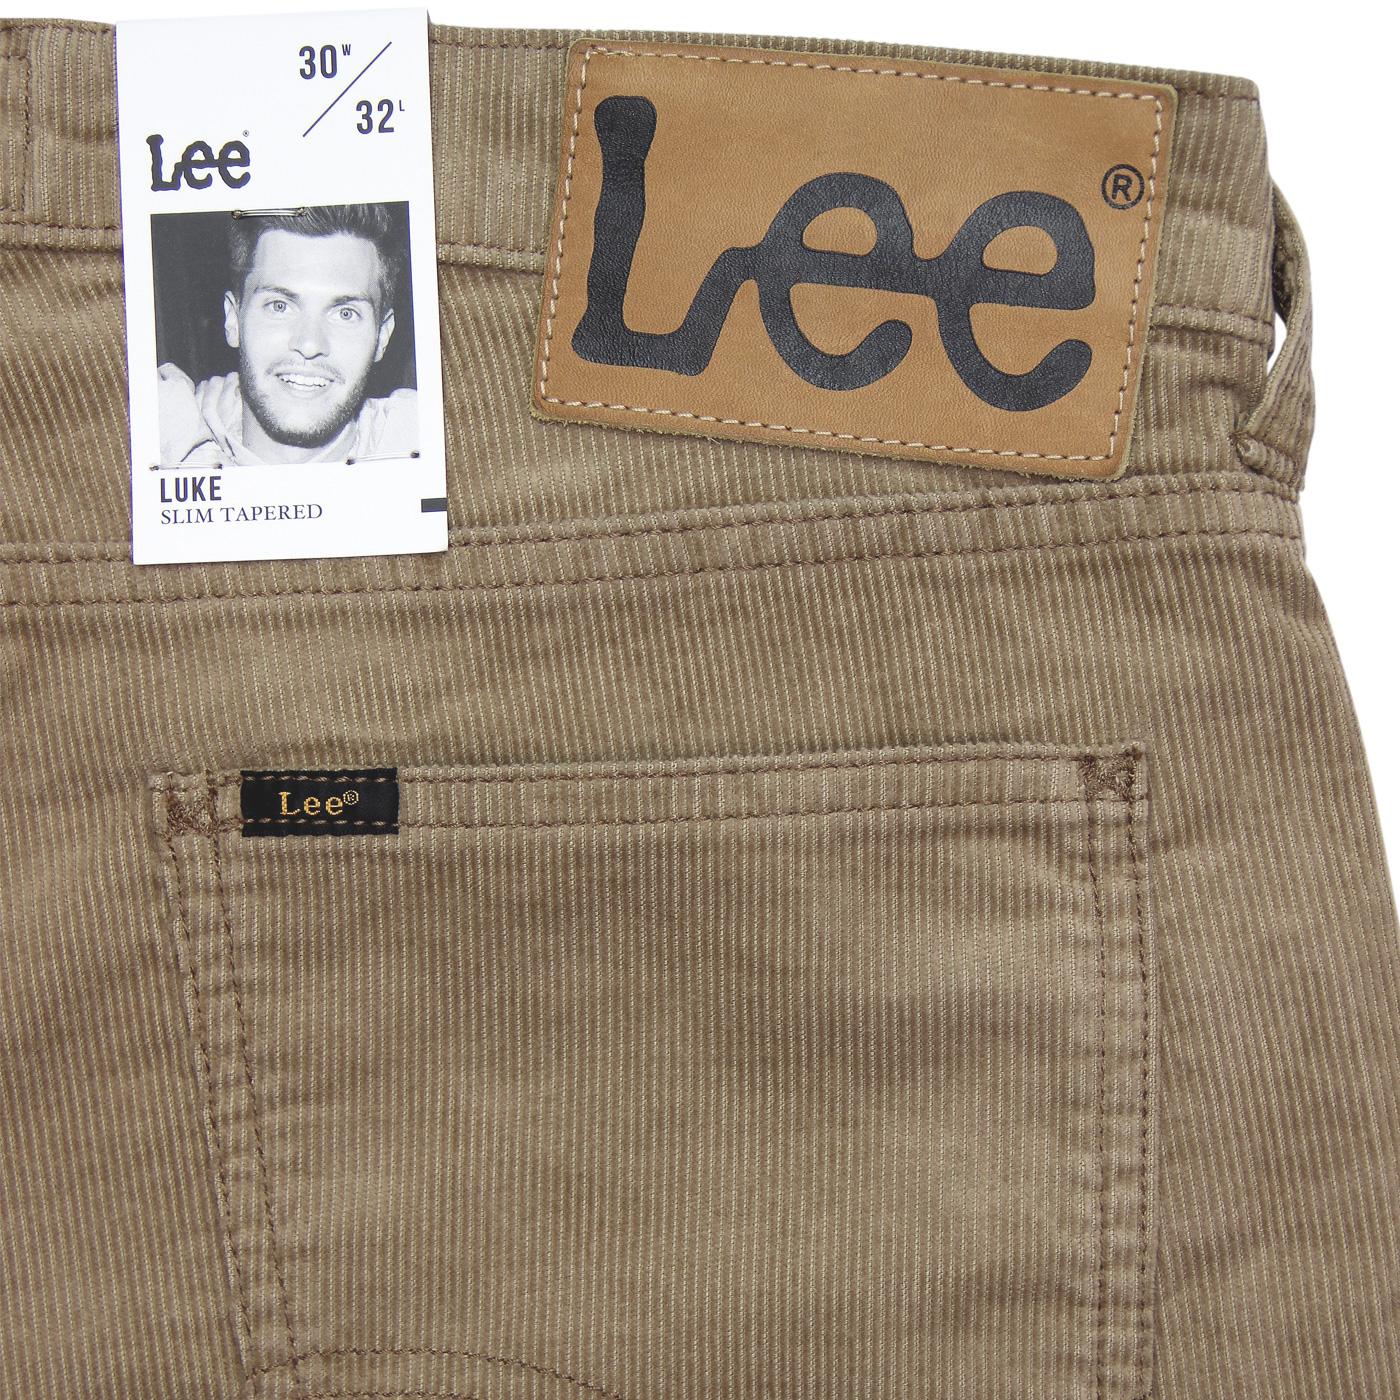 lee cord jeans